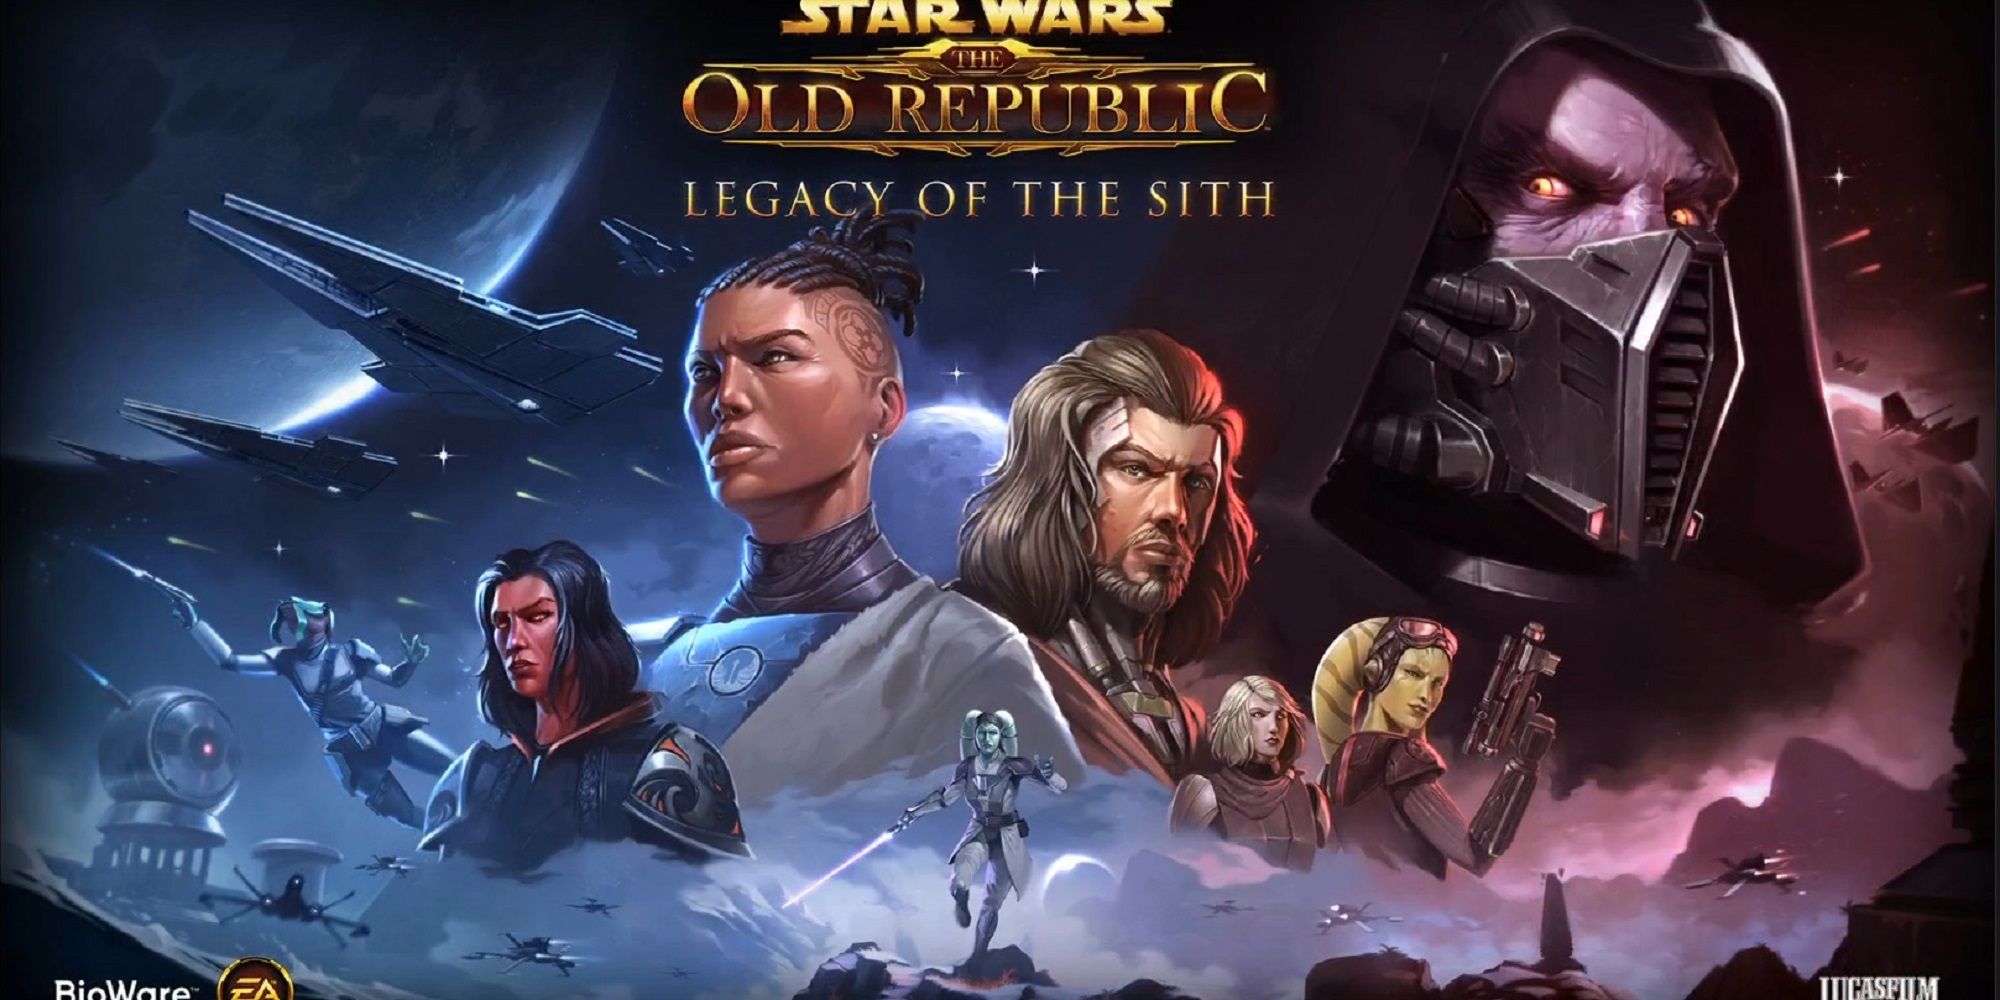 SWTOR Legacy of the Sith expansion loading screen